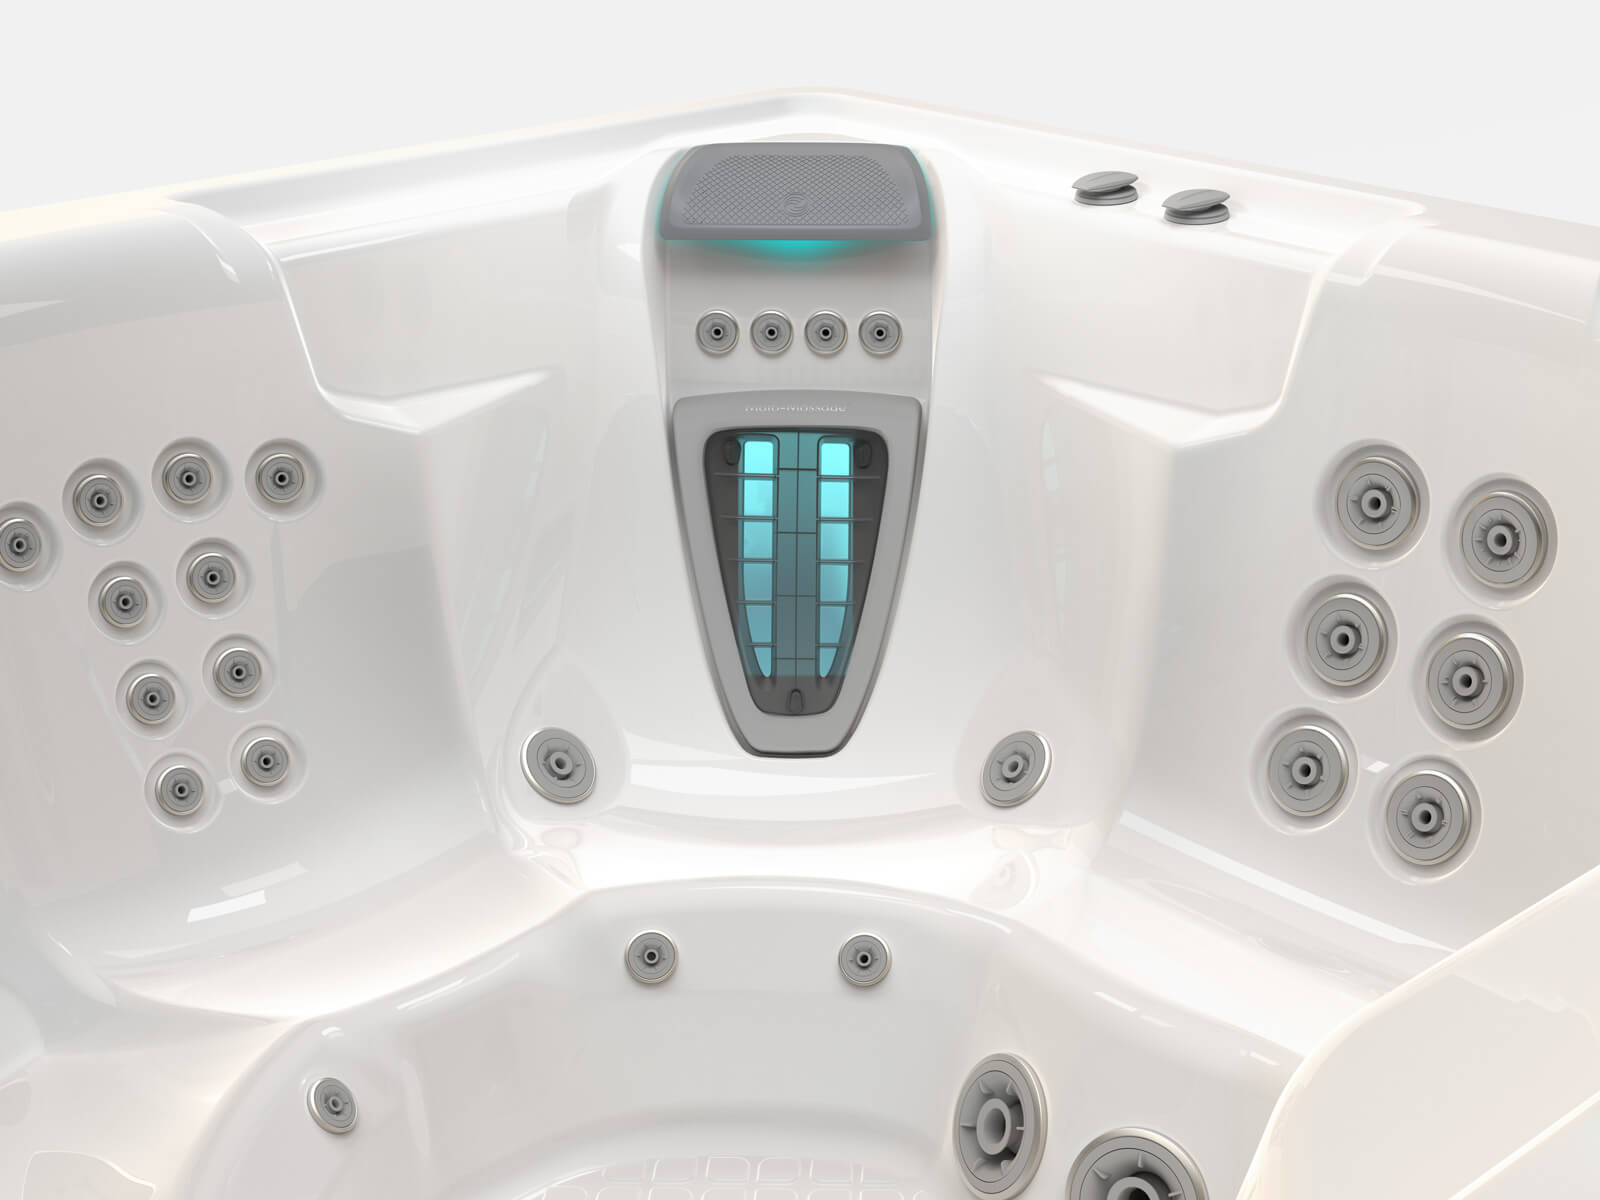 Vanguard Hot Tub Spa Seat Details | Hot Springs Spas available at the Recreational Warehouse Southwest Florida (Naples, Fort Myers and Port Charlotte Locations) Pool Warehouse